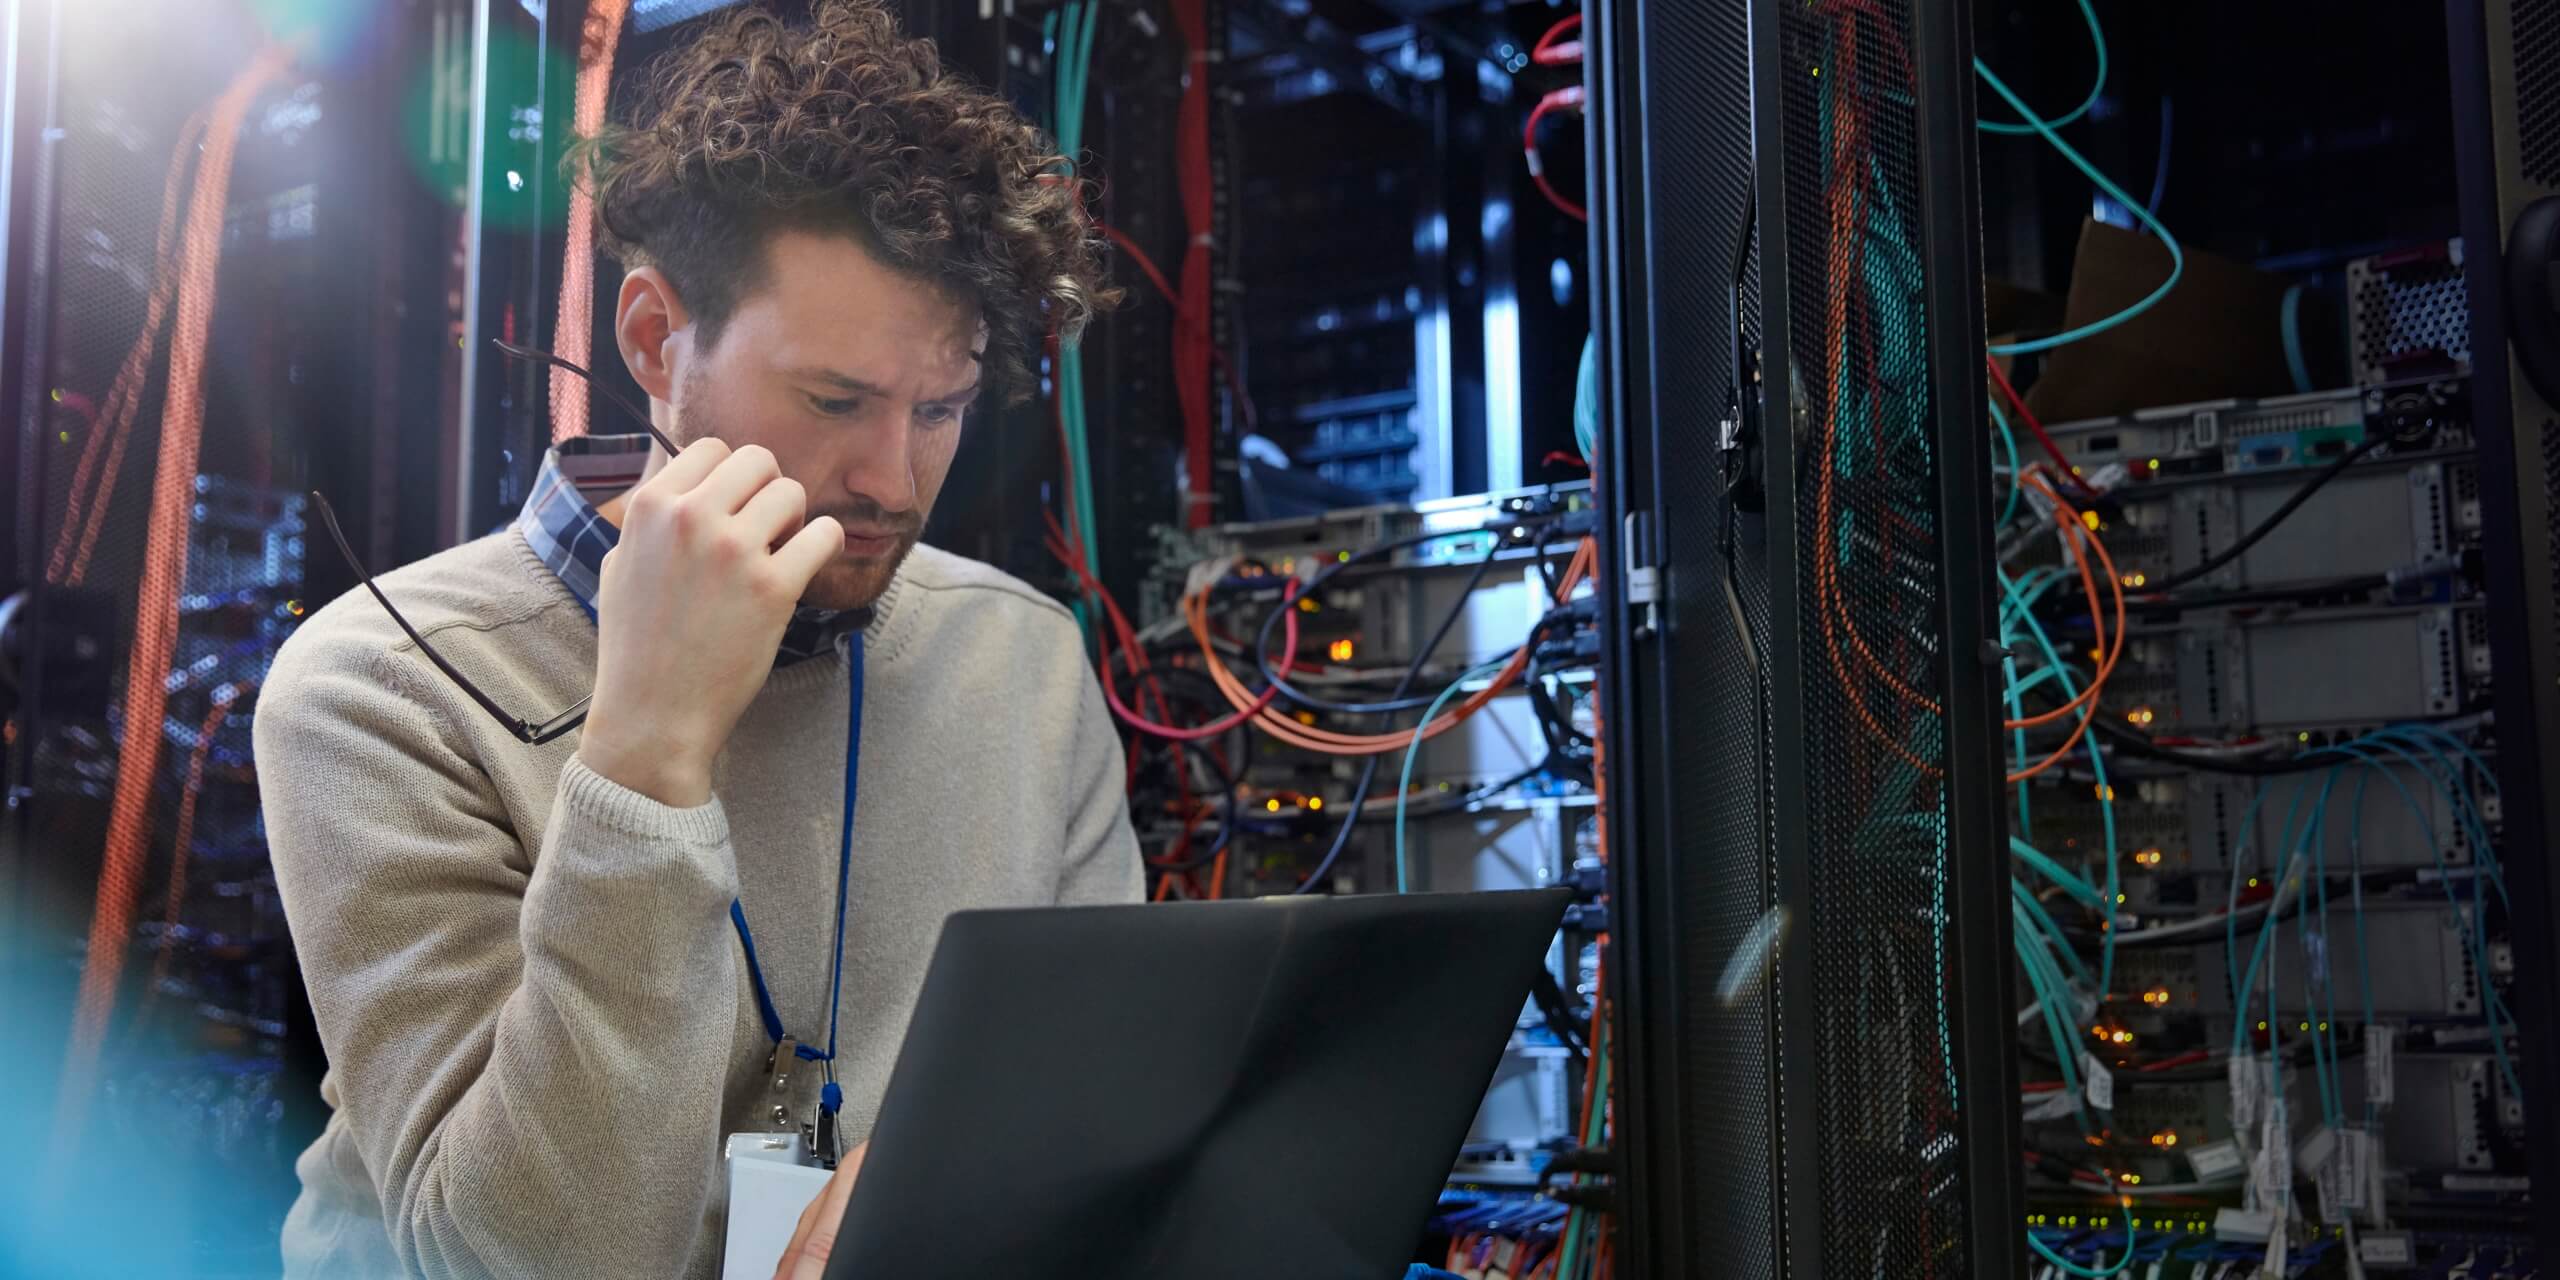 header image showing man looking at laptop in a data center